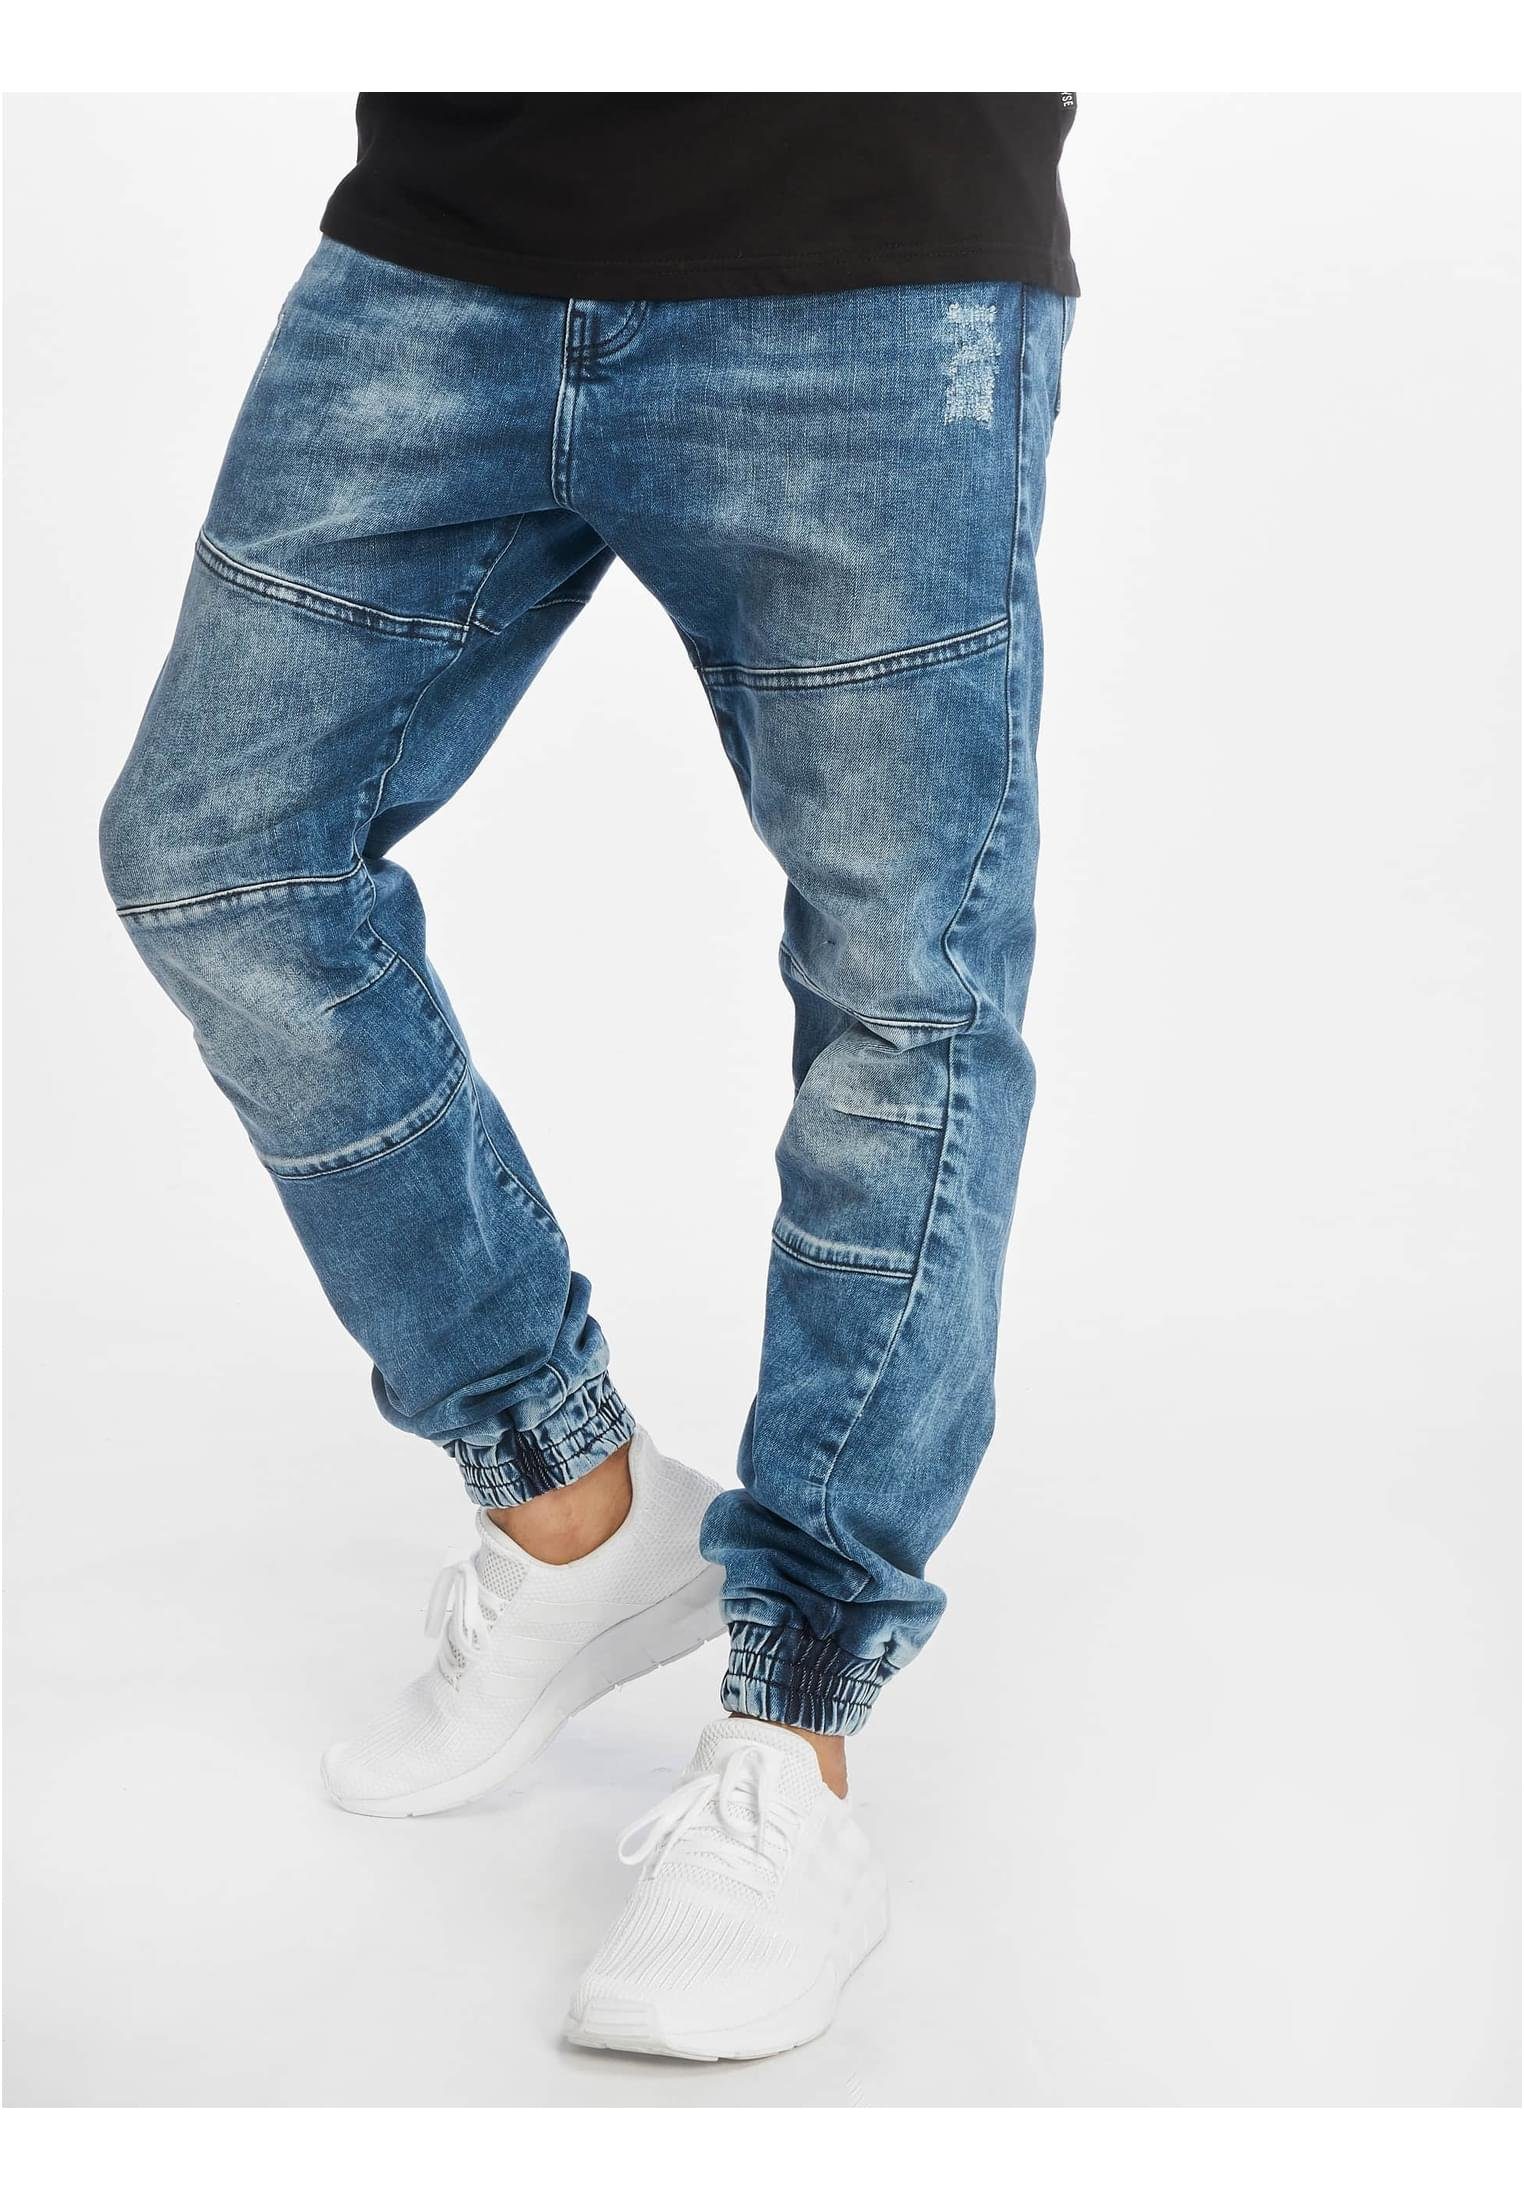 Cool Jeans Straight Jeans denimblue (1-tlg) Fit Bequeme Just Herren Rhyse